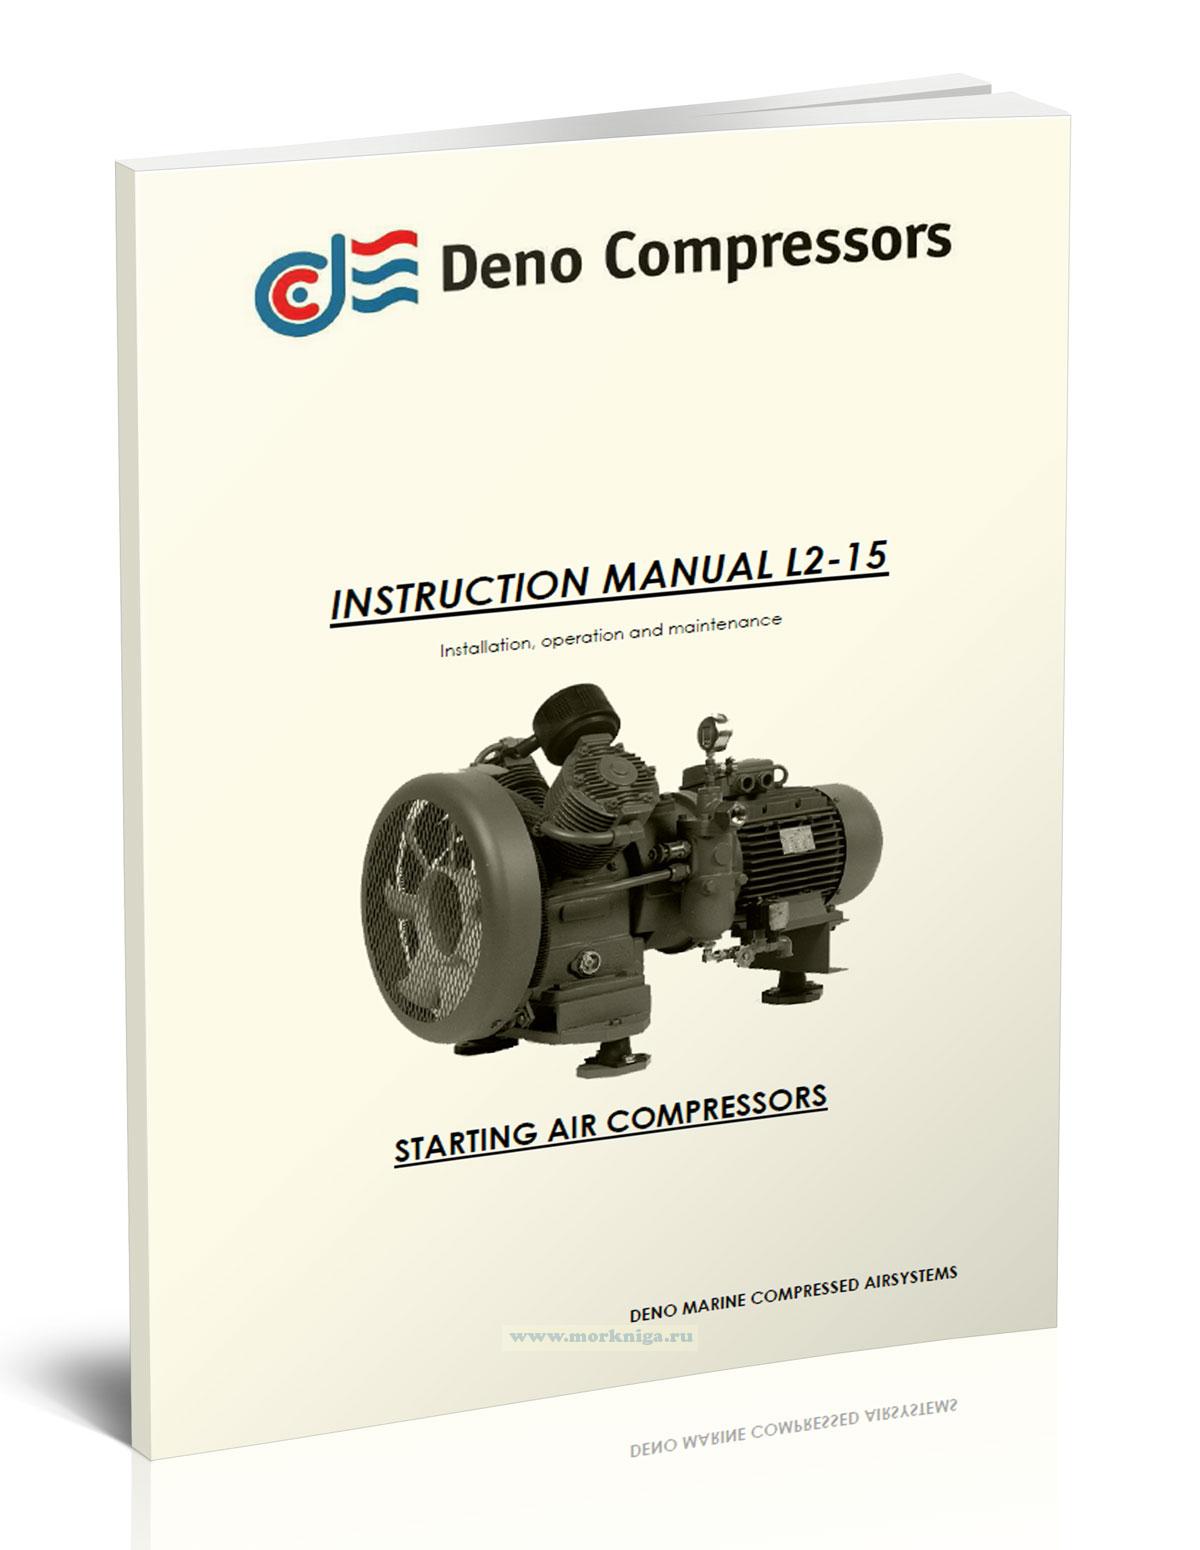 Starting air compressors. Instruction manual L2-15. Installation, operation and maintenance